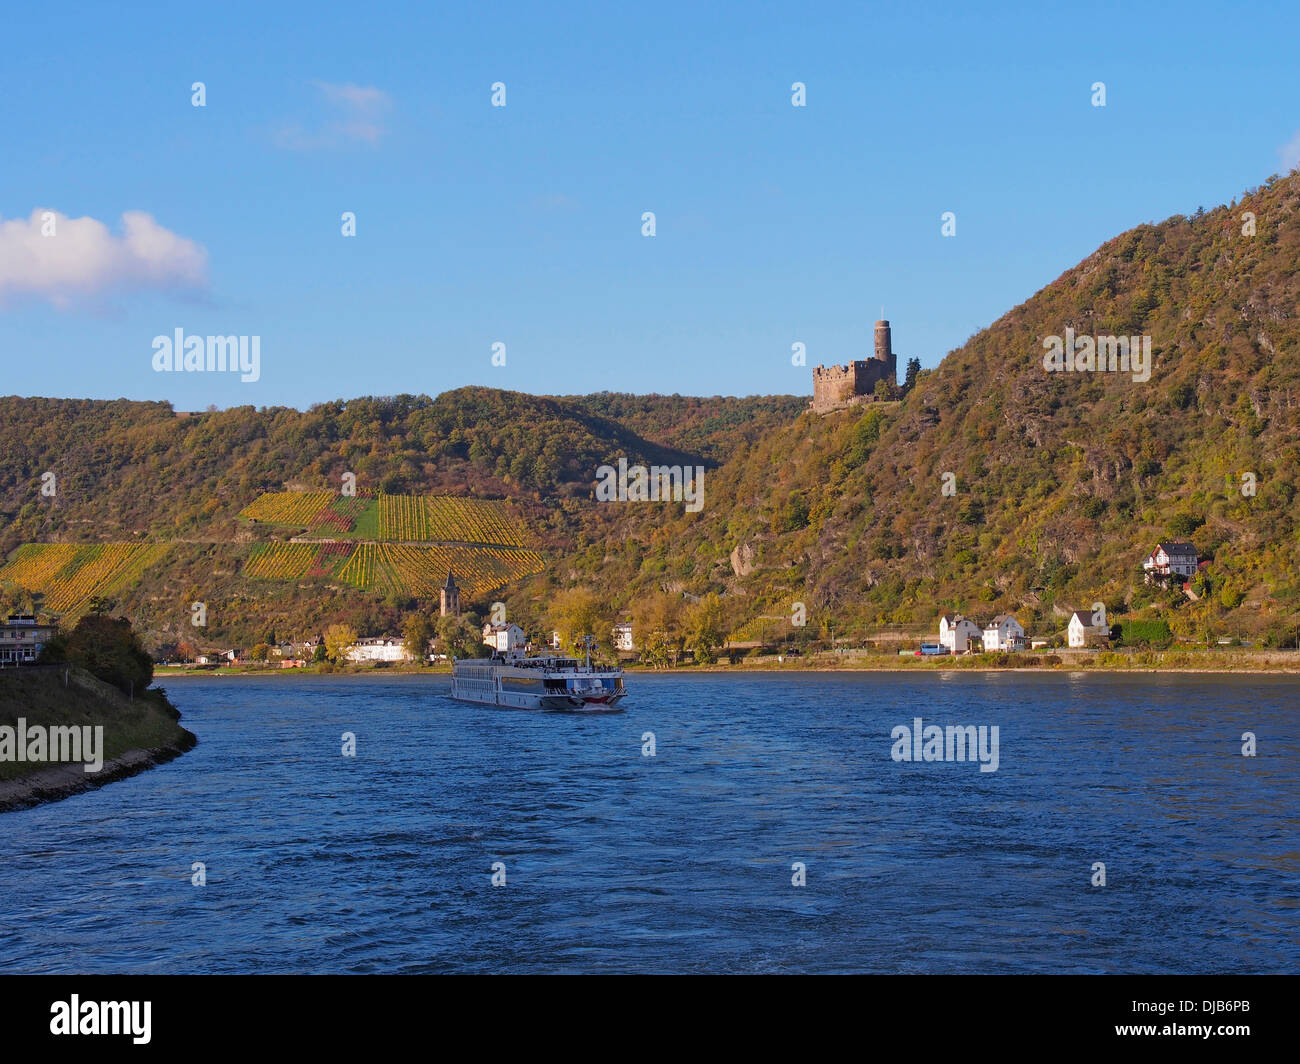 Castle in the Rhine Valley, Germany, Stock Photo